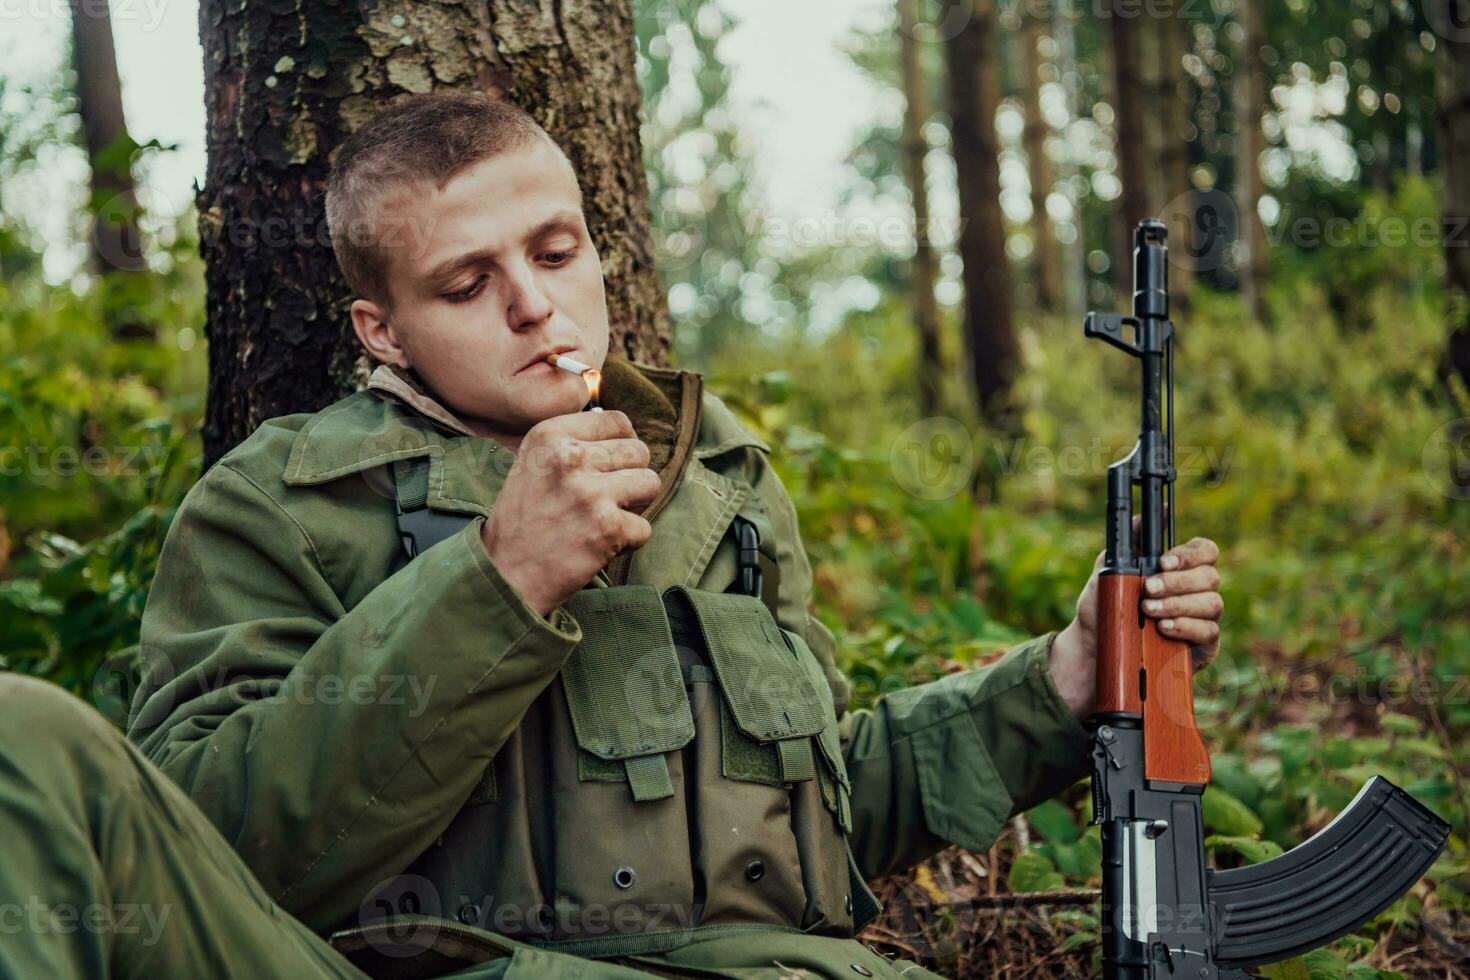 Terrorist have a break and smoke cigarette in forest during battle photo